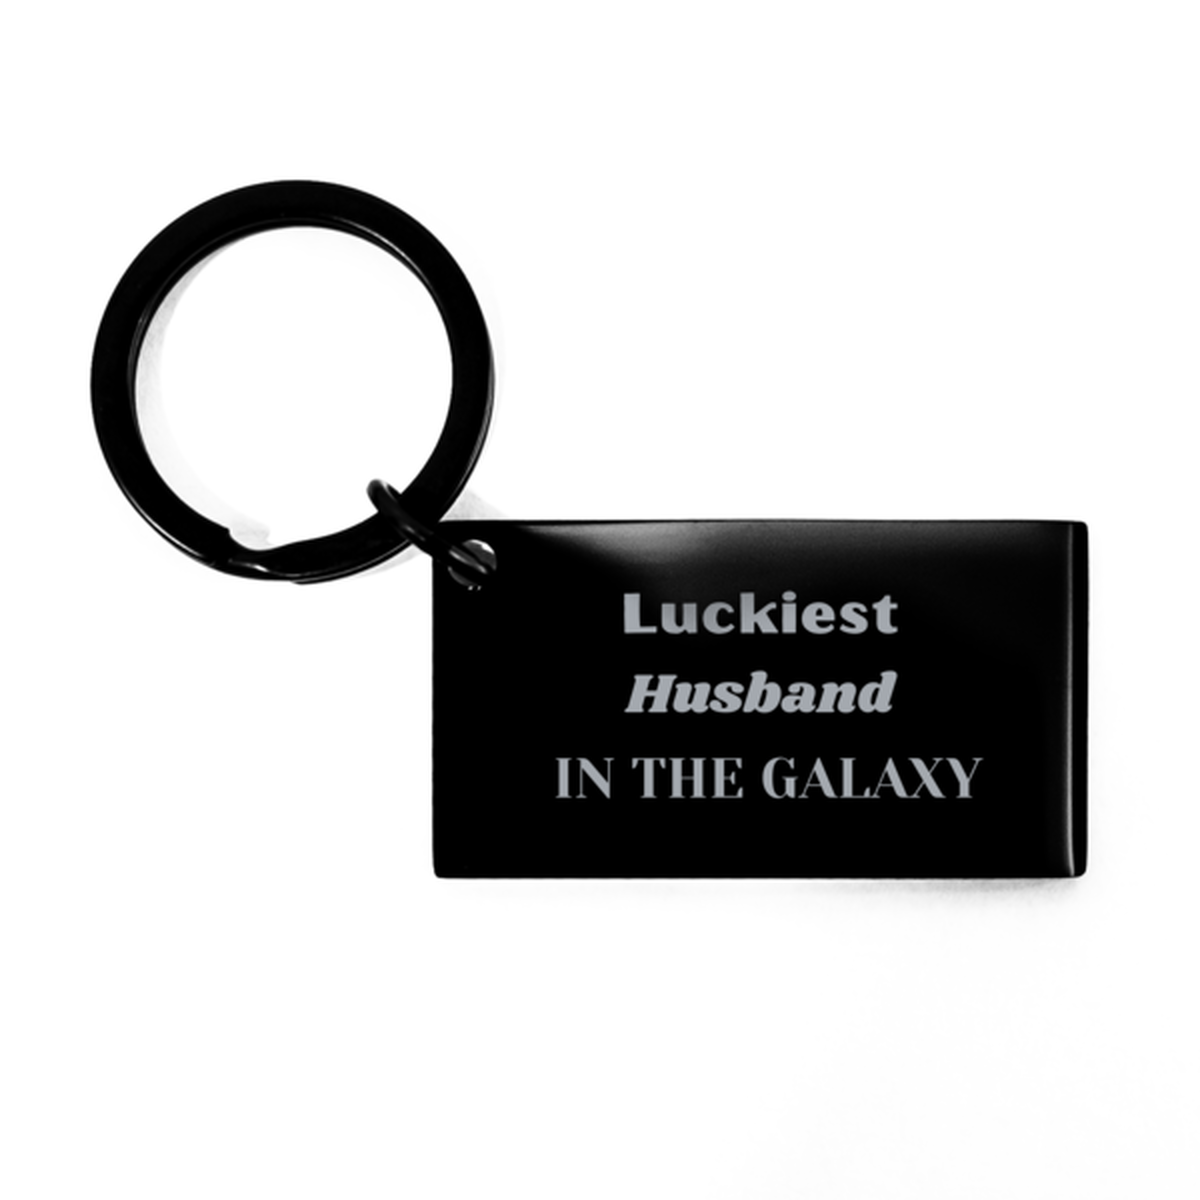 Luckiest Husband in the Galaxy, To My Husband Engraved Gifts, Christmas Husband Keychain Gifts, X-mas Birthday Unique Gifts For Husband Men Women